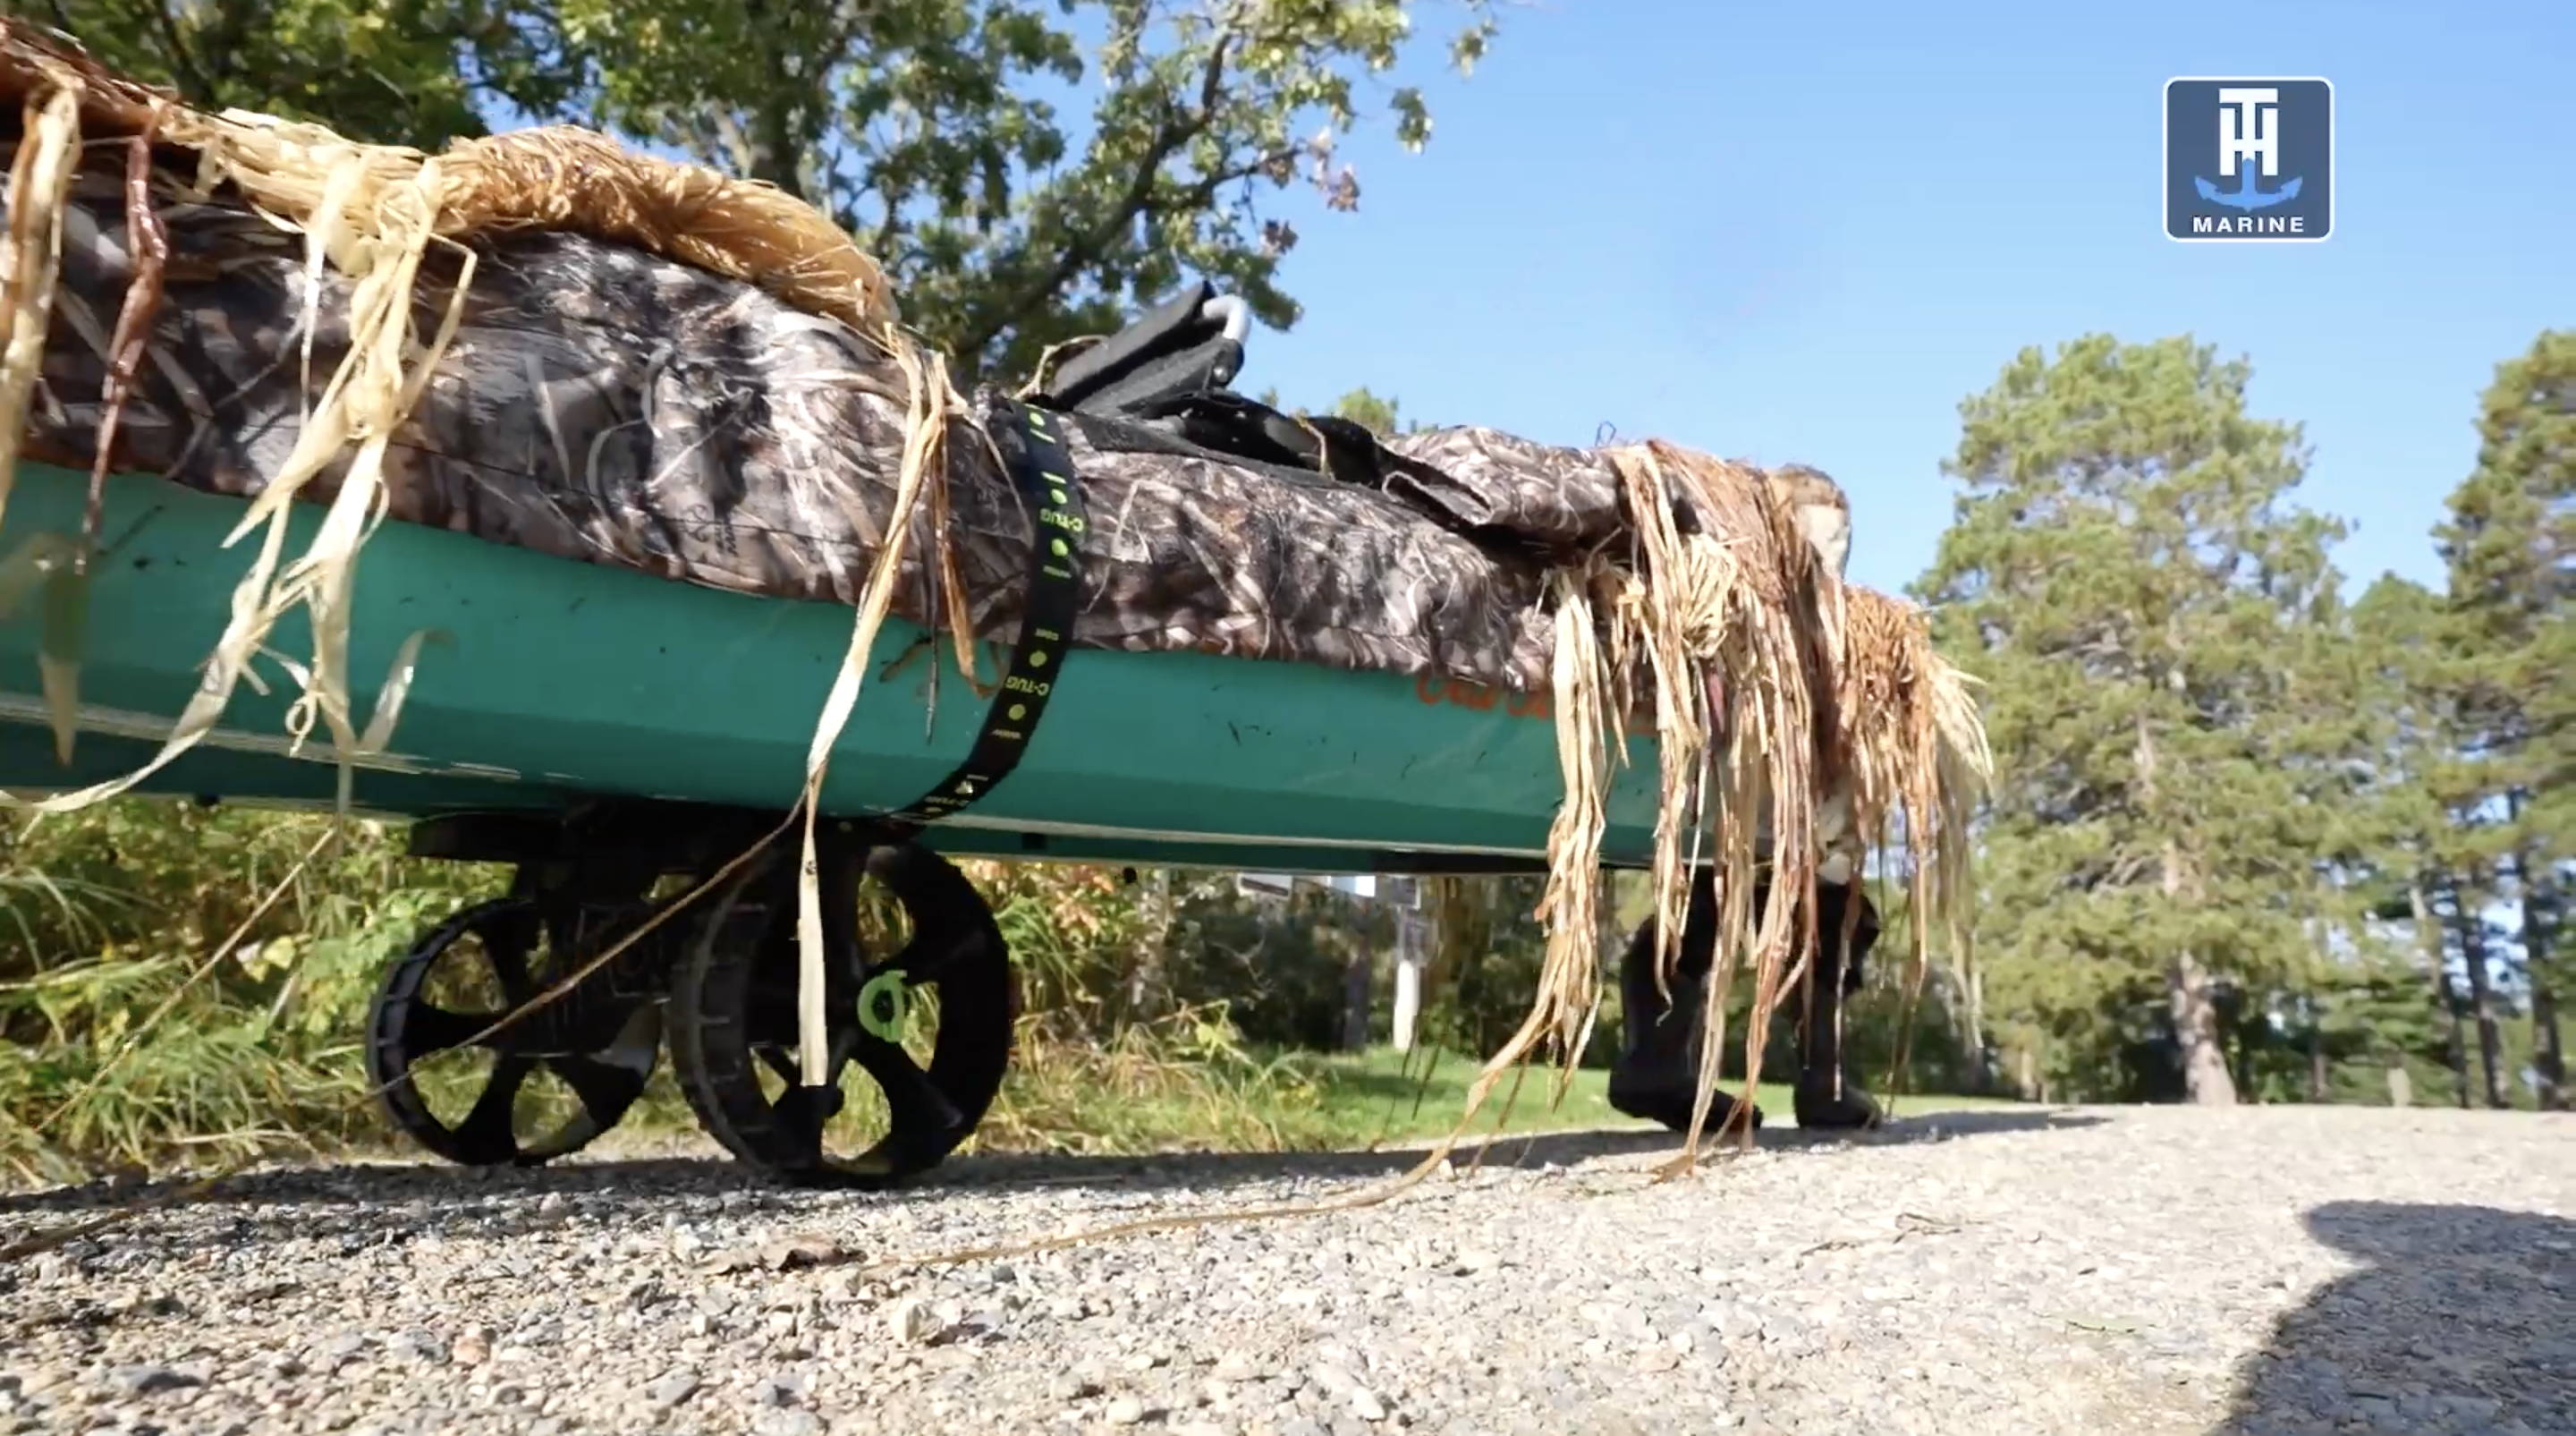 For a duck hunting kayak, few accessories make your life easier than a Railblaza kayak cart